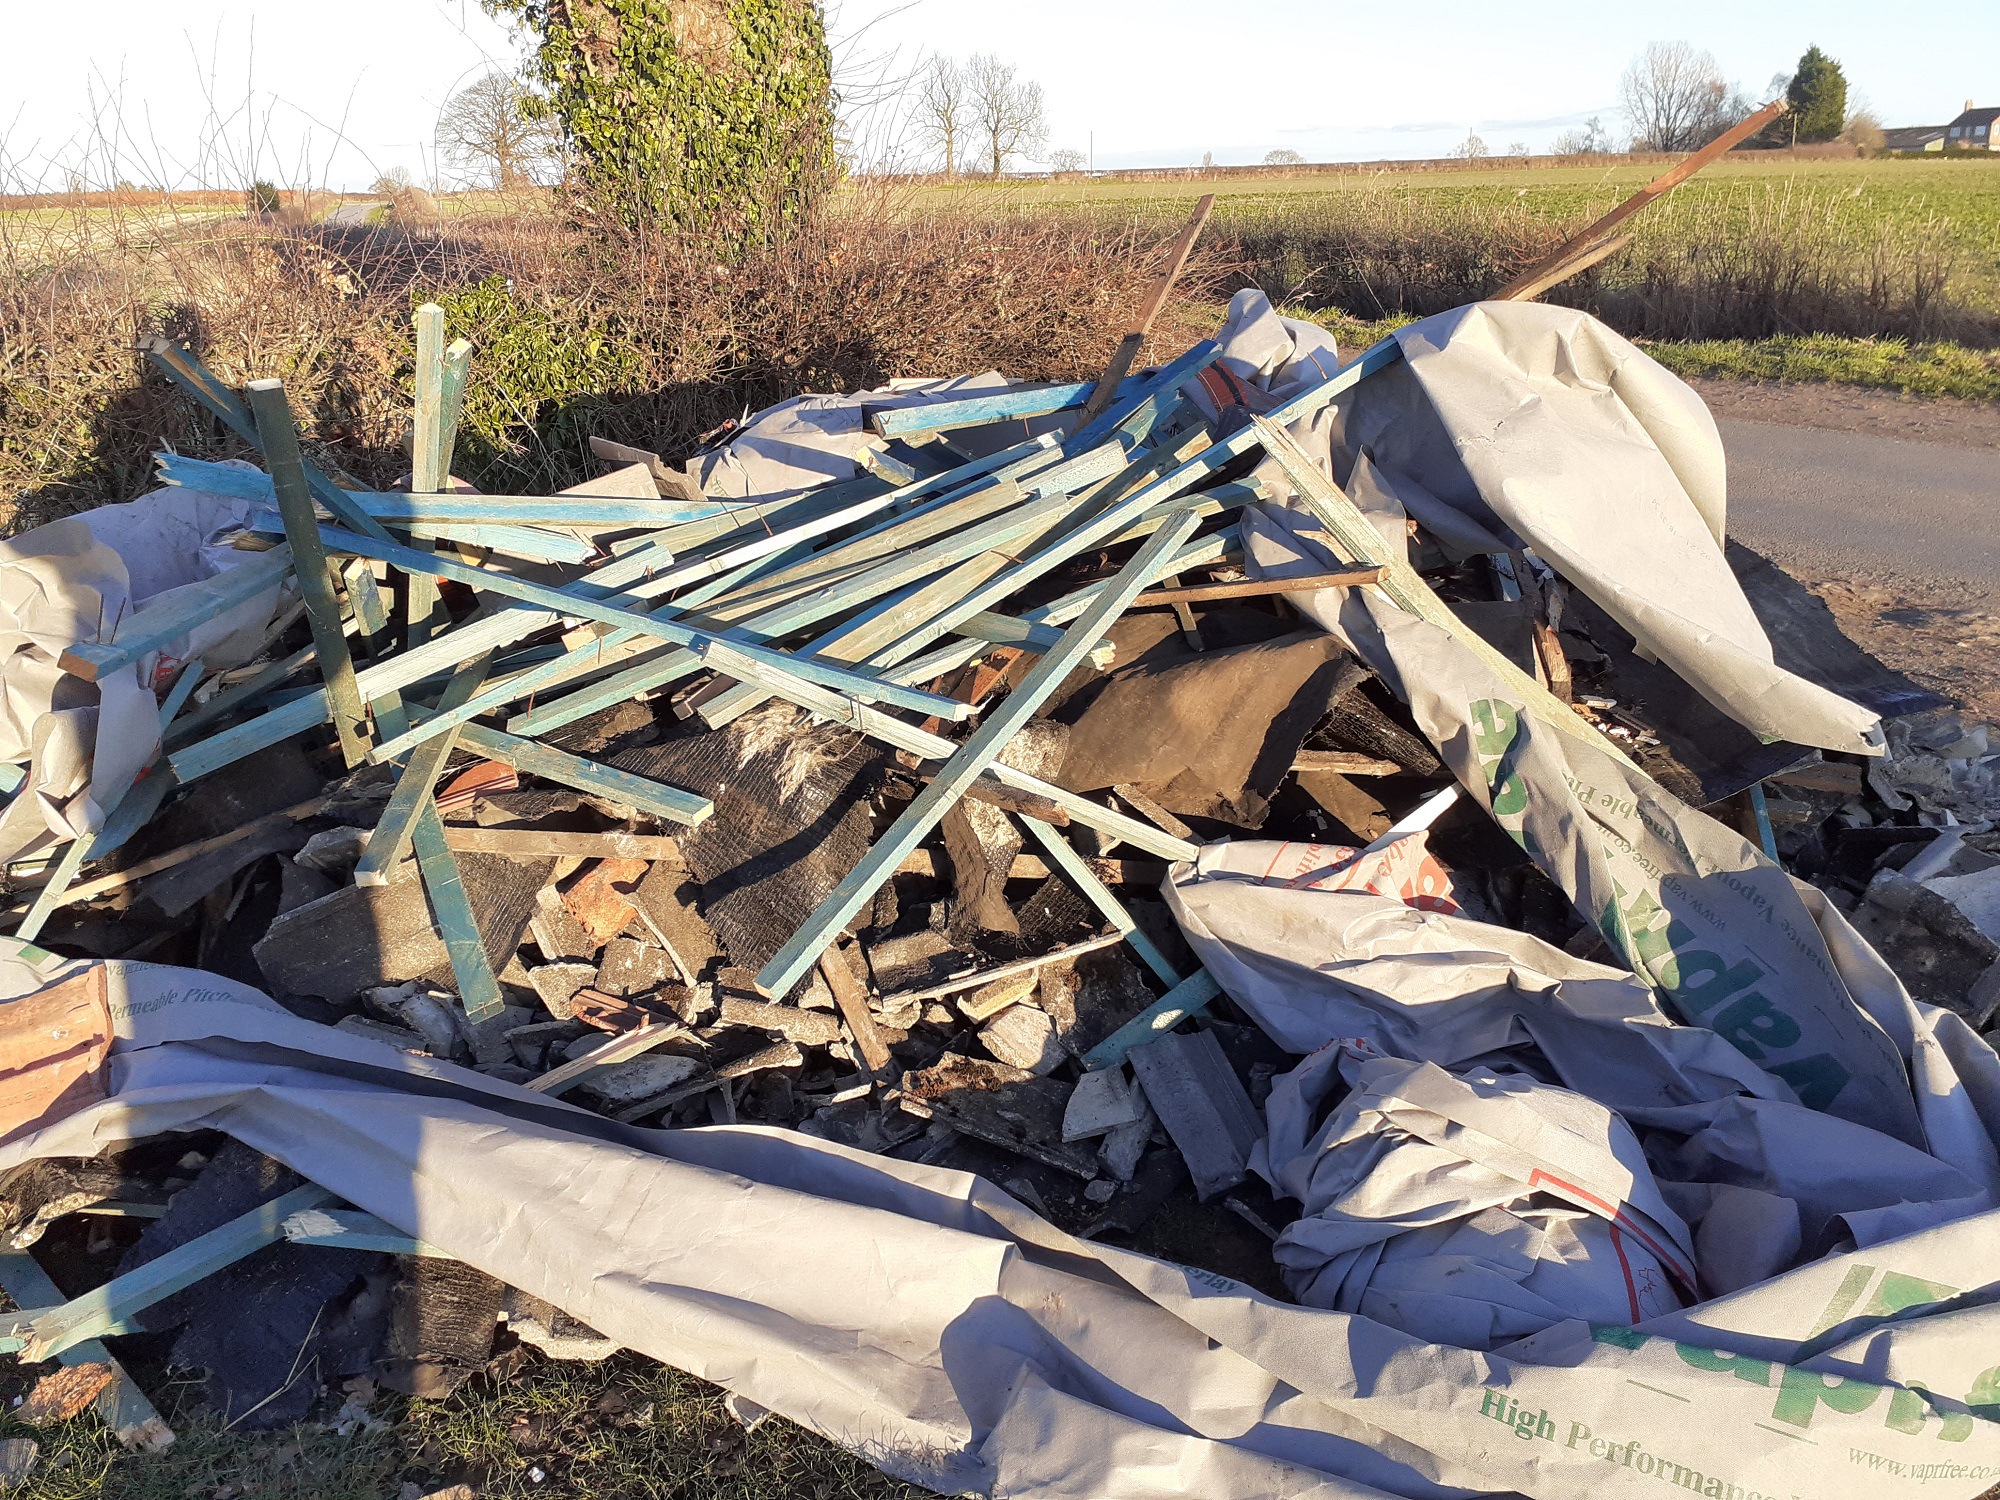 A heap of fly-tipping